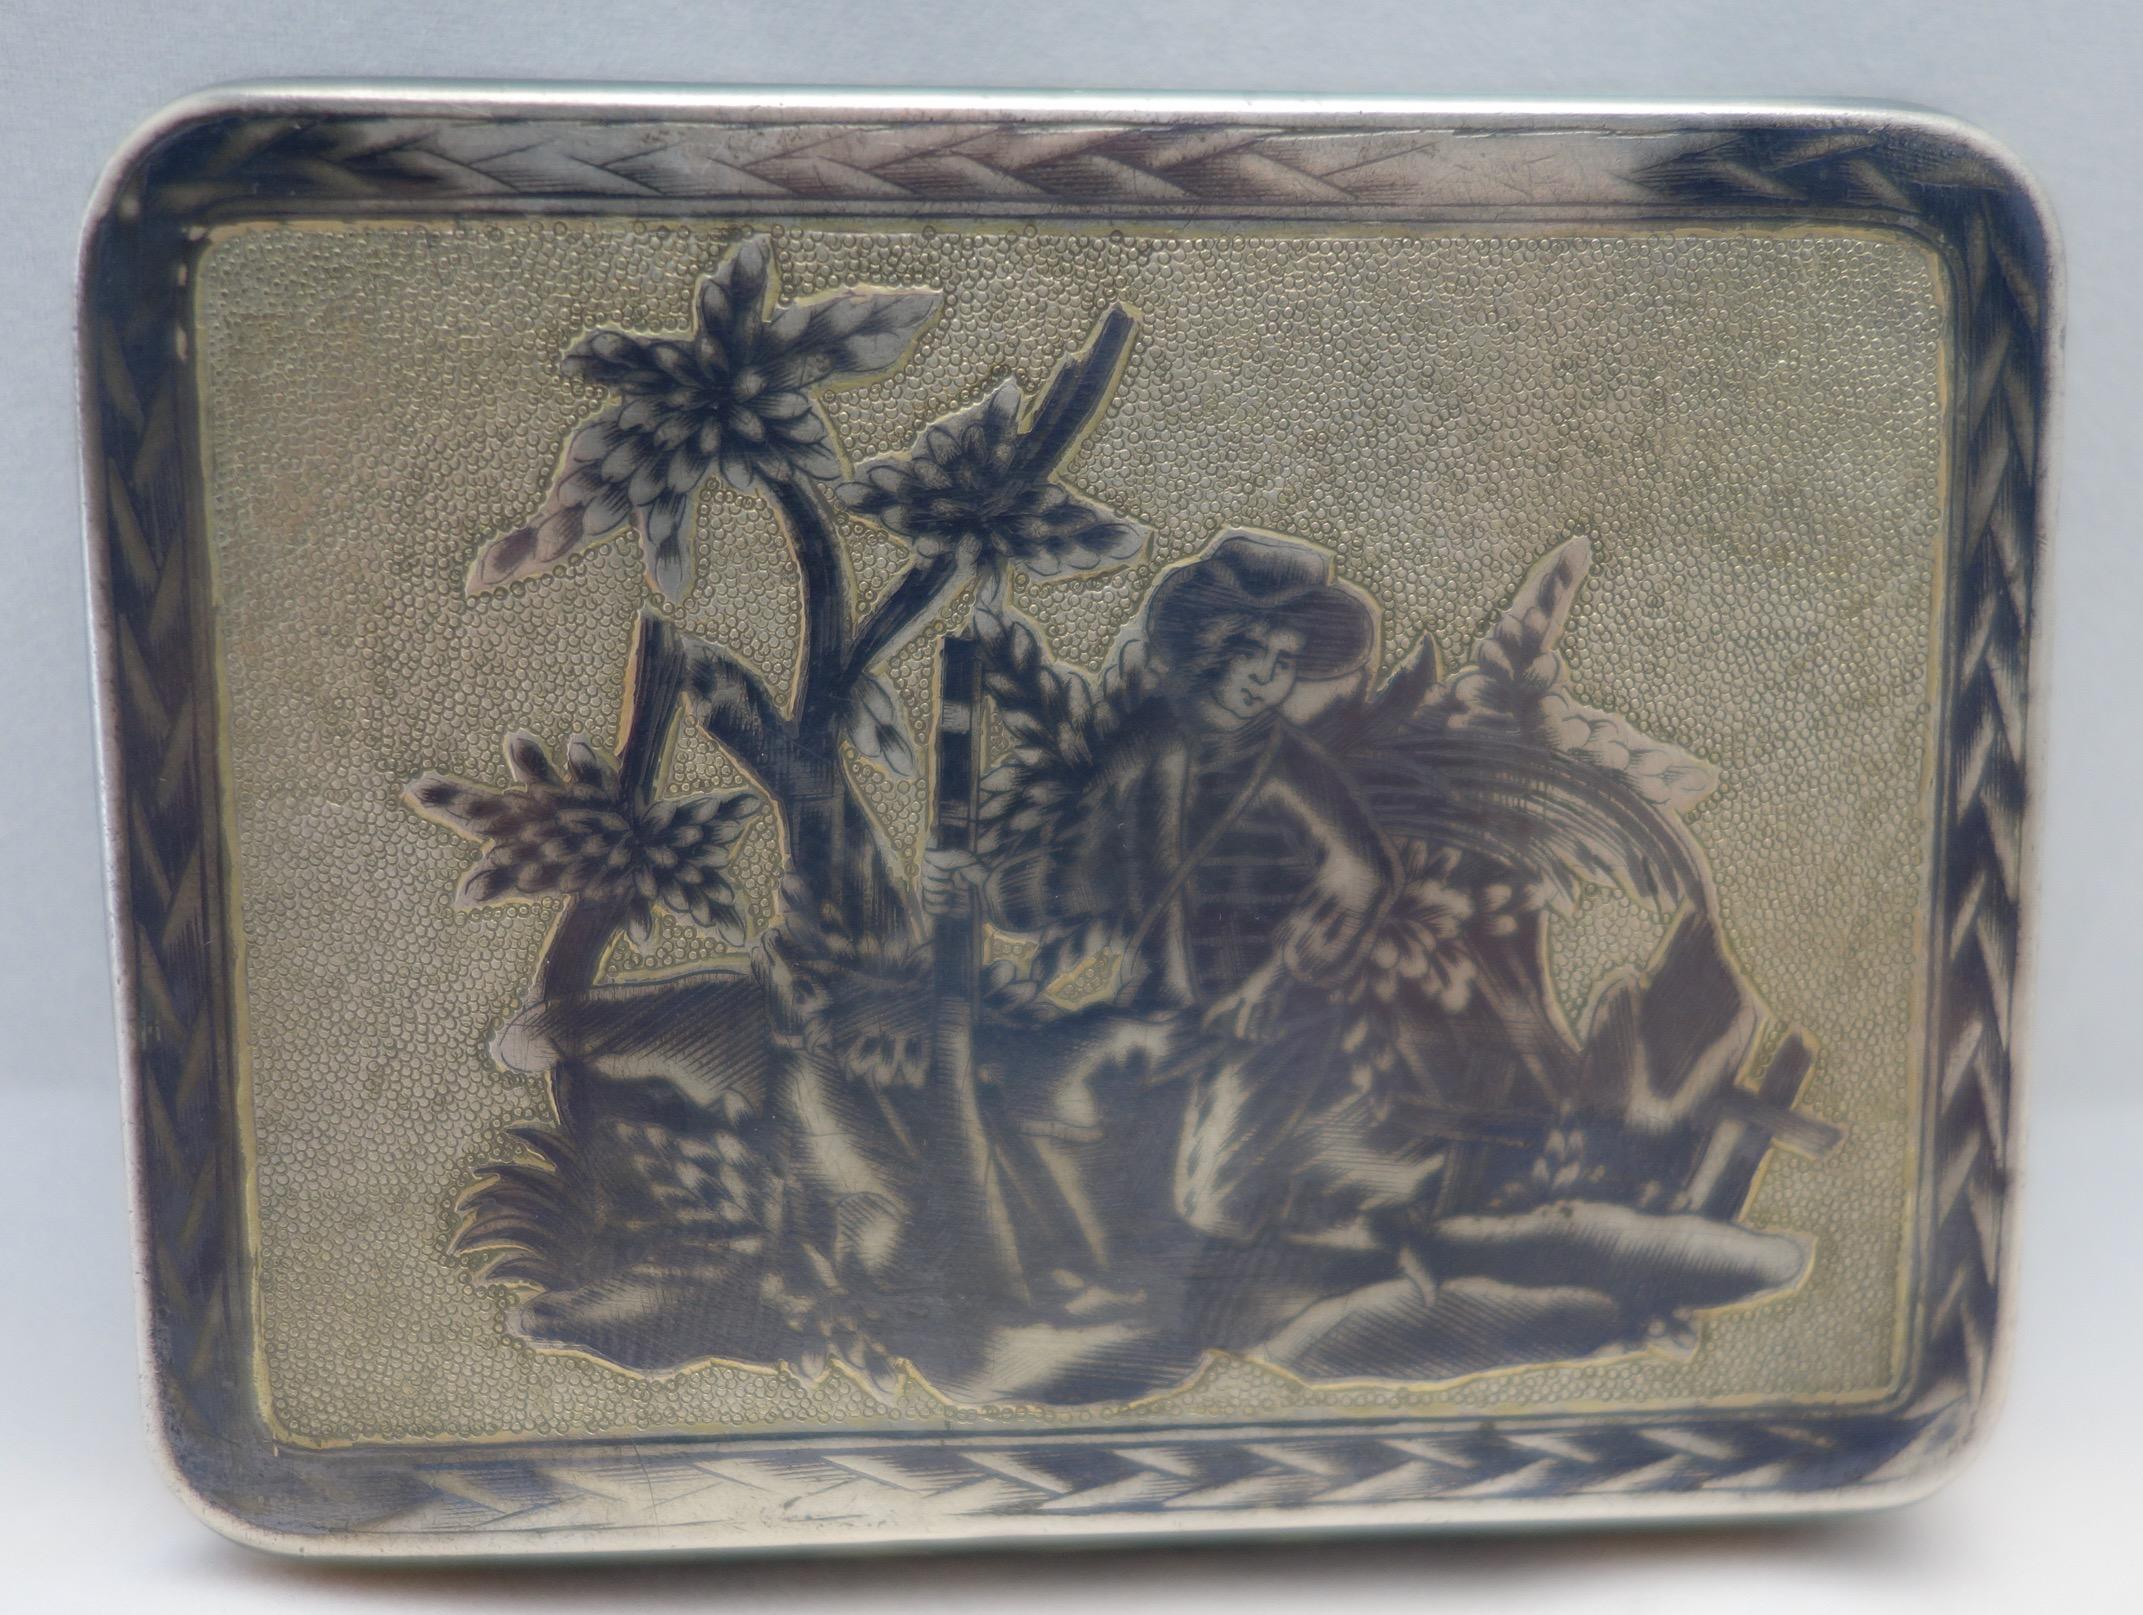 Russian silver niello tobacco box with finely etched pastoral scenes and interior gold wash. The box is marked on inside with 